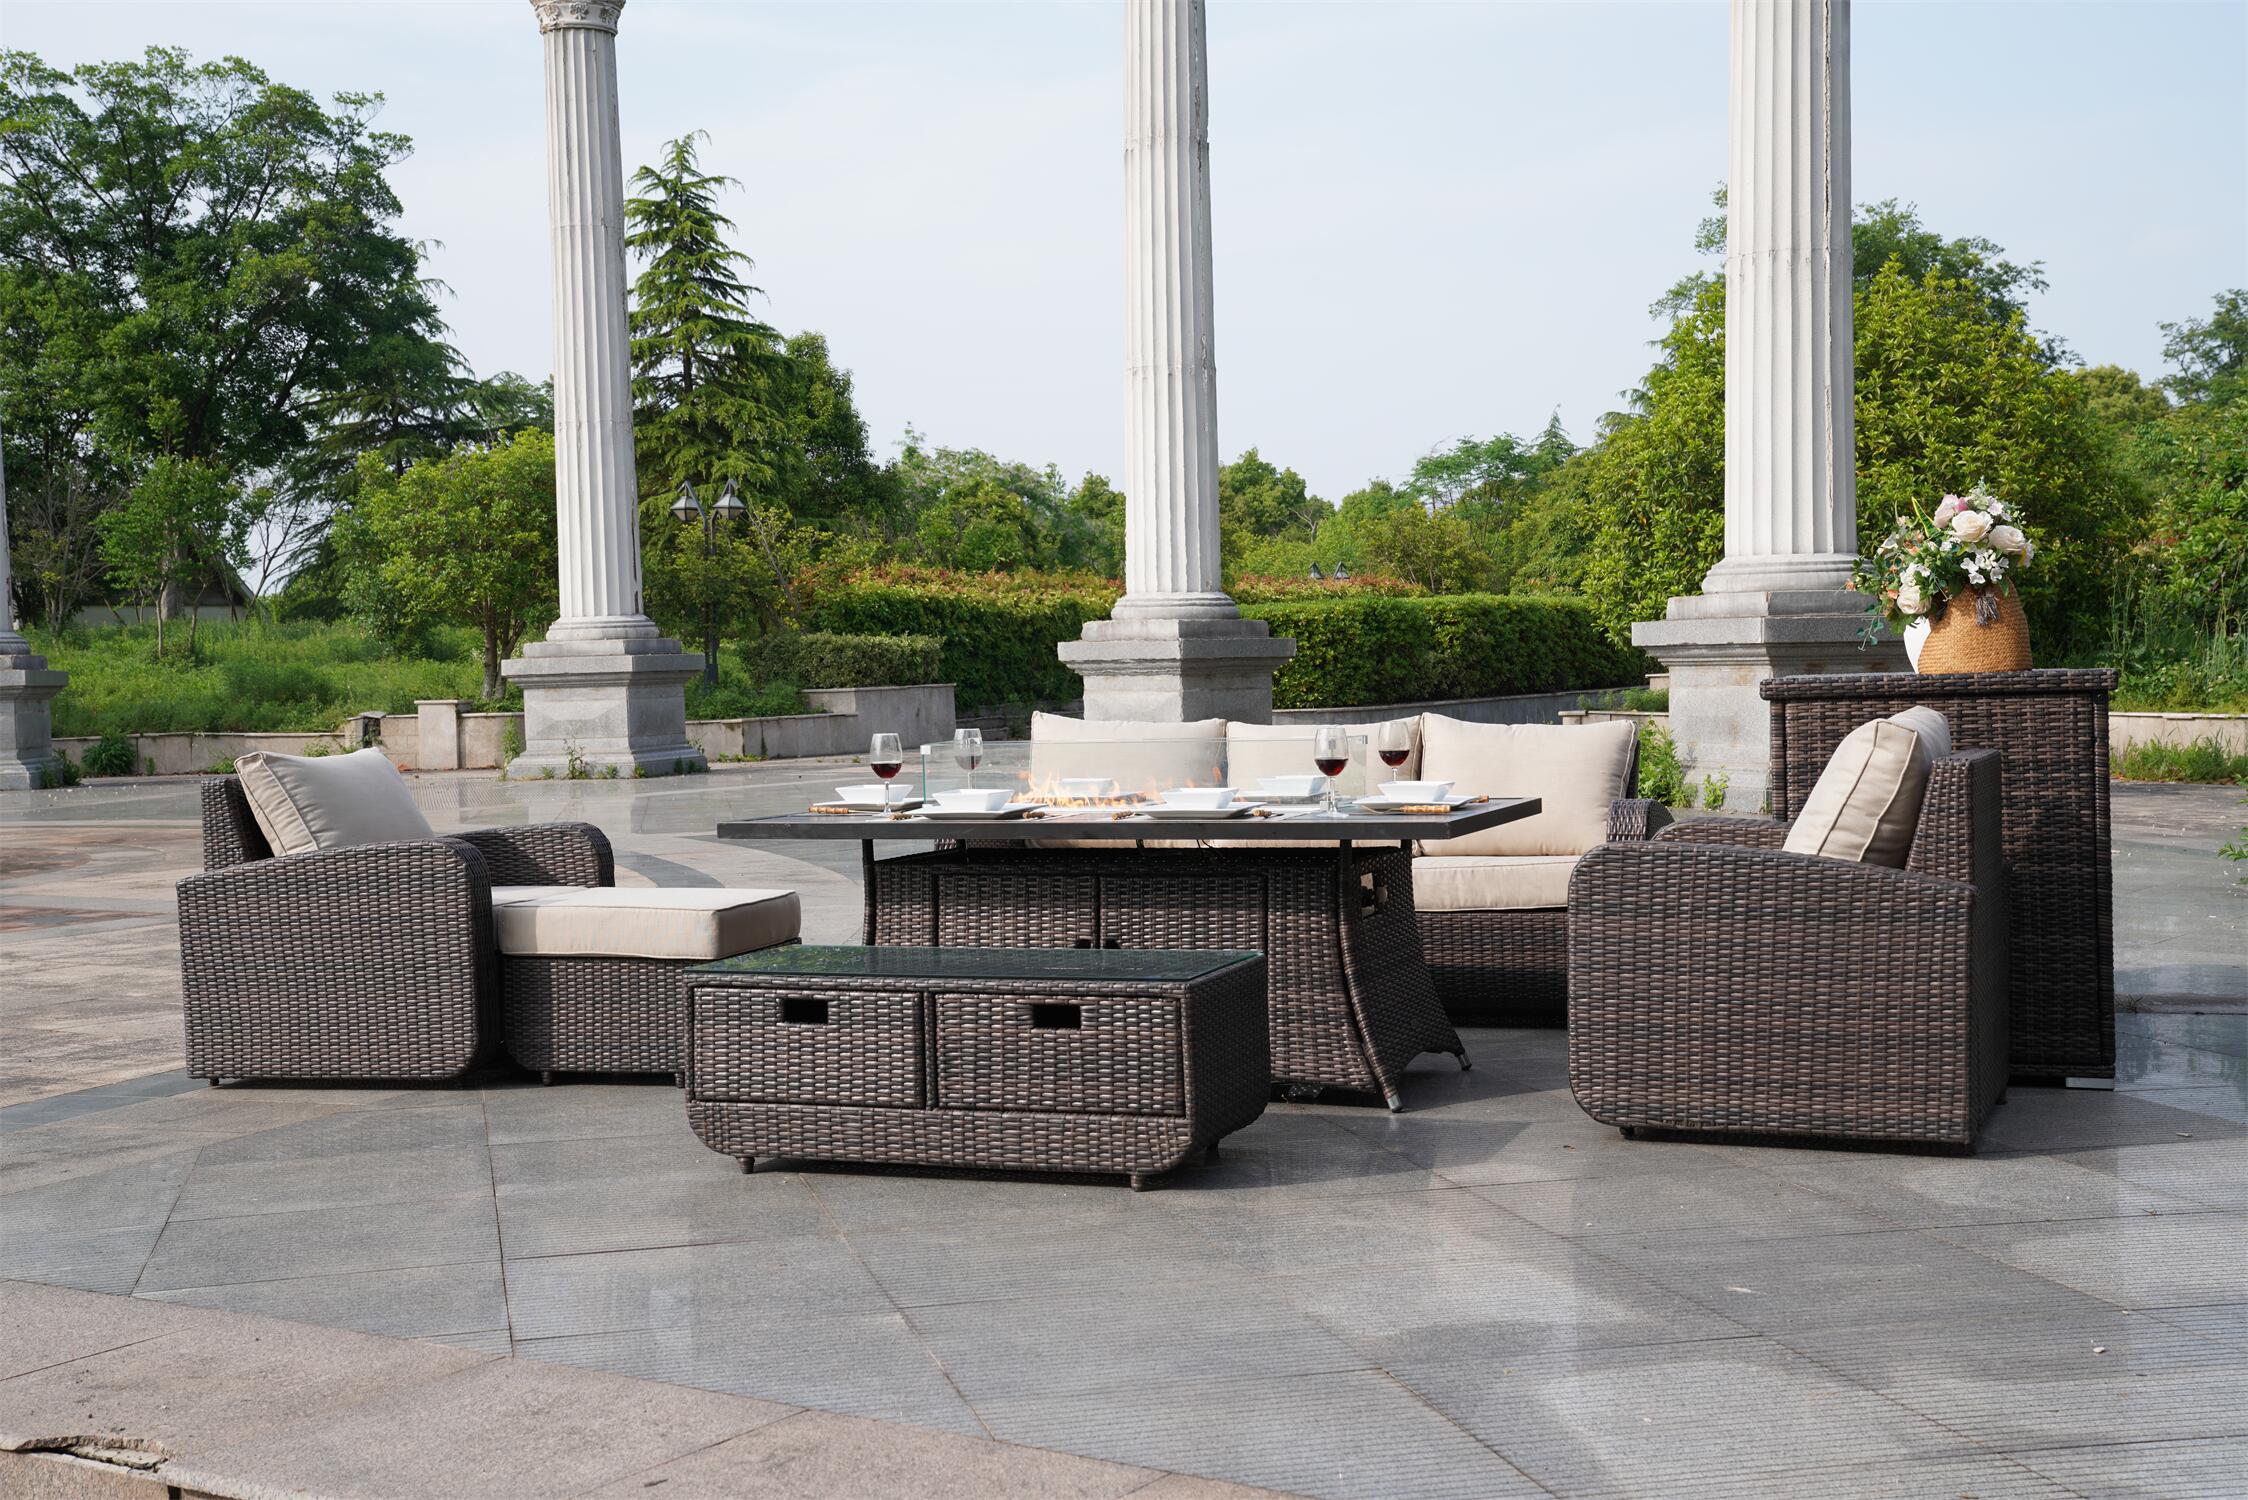 Patio Wicker Sofa Chat Set with Aluminum Firepit Table